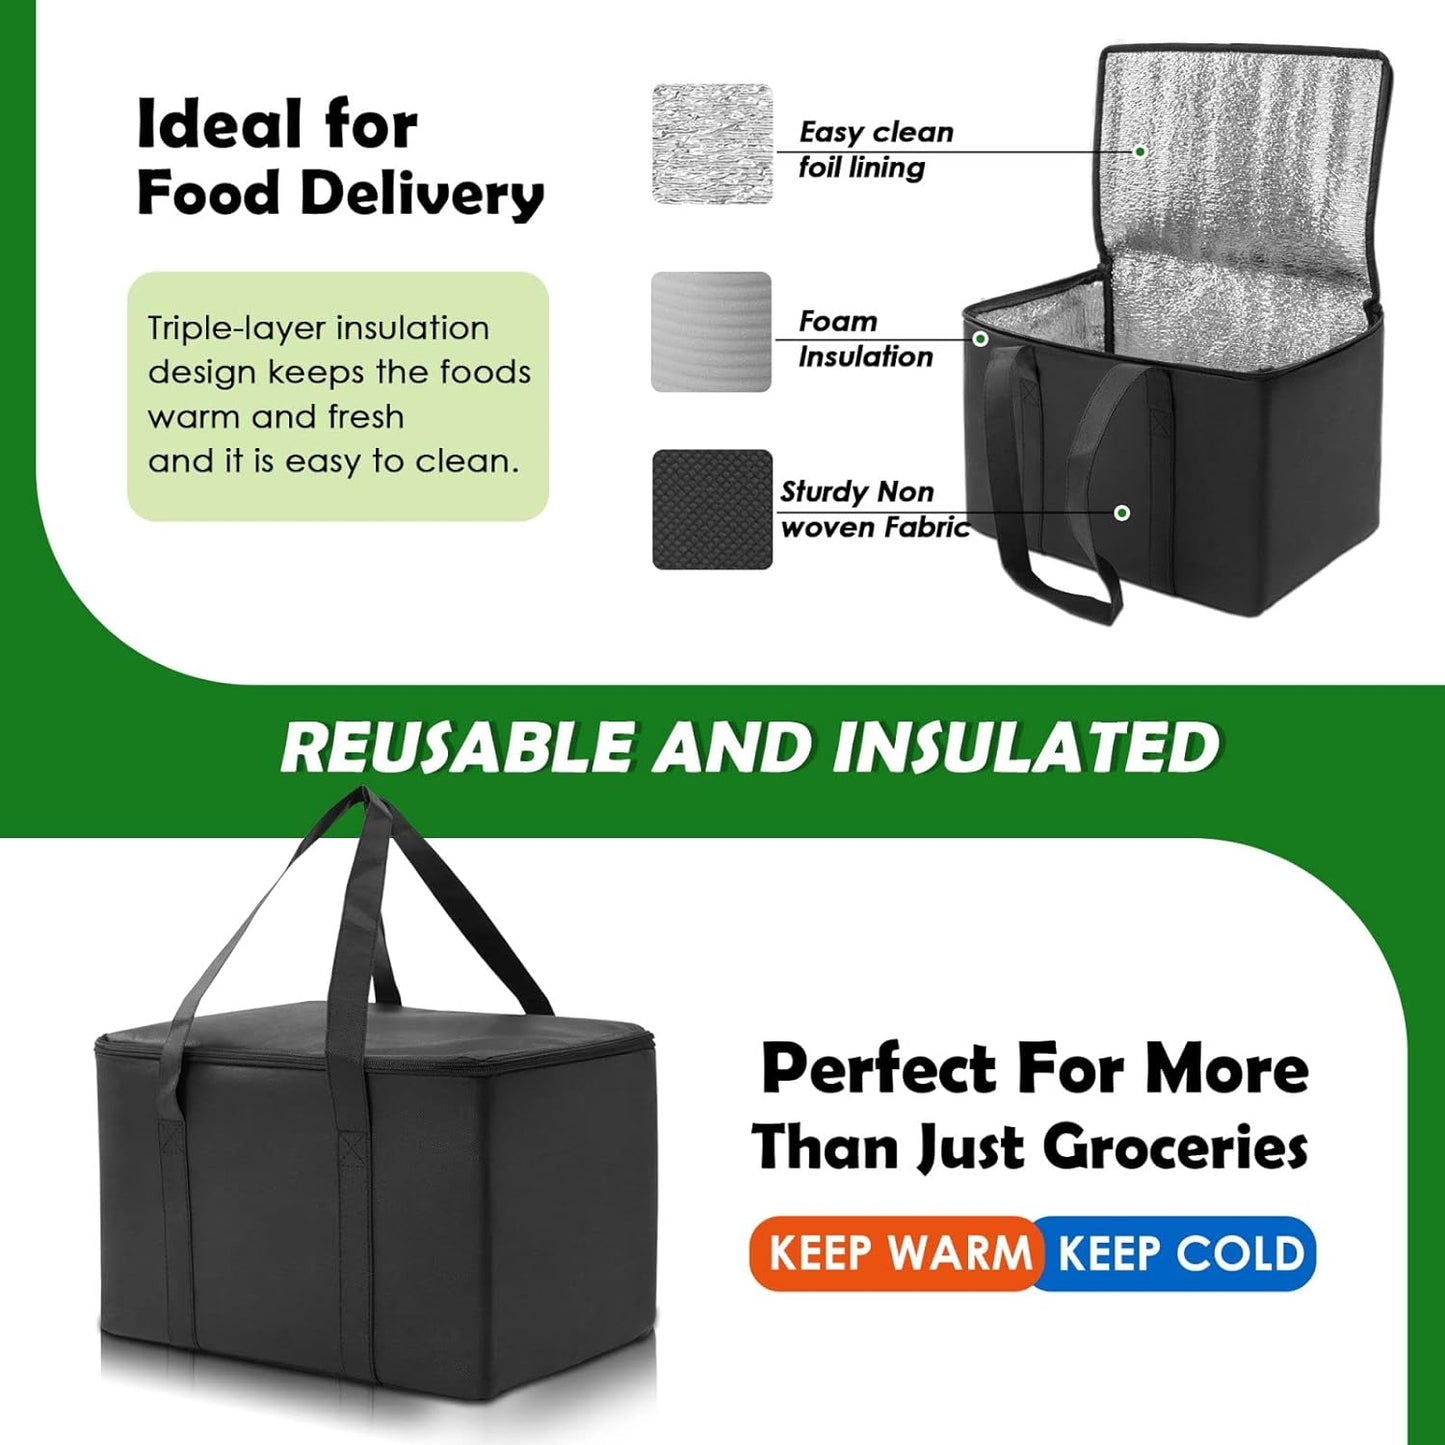 3 Pack Reusable Grocery Bags, Foldable Washable Insulated Shopping Bags for Groceries, Heavy Duty with Reinforced Bottom & Handles (2 Grocery Tote Bags + 1 Insulated Cooler Bag)